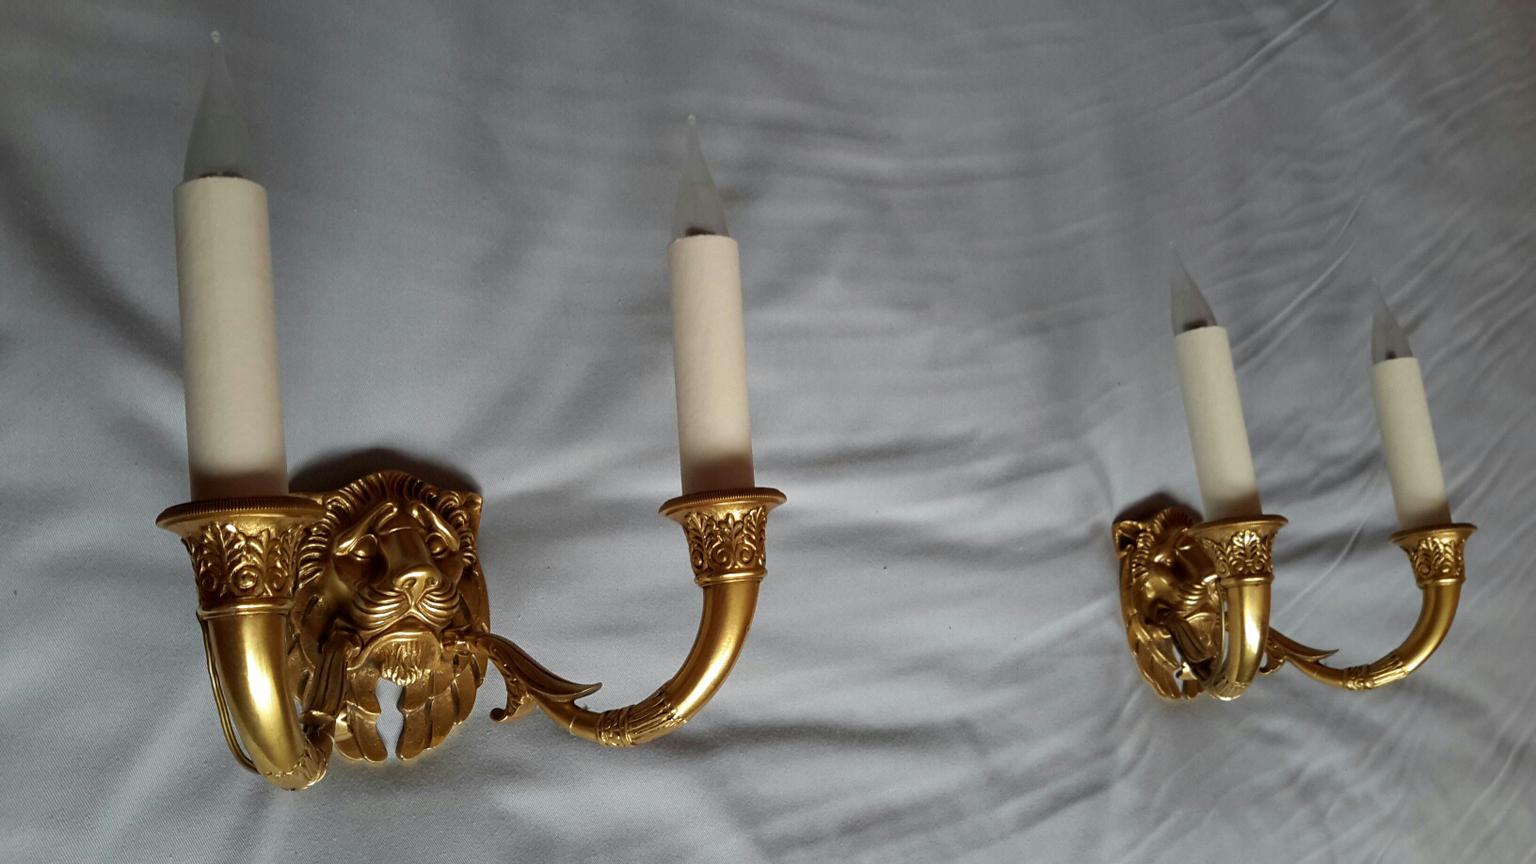 Rare and beautiful pair of double sconces French Empire style from beginning of the 20th century in gilted bronze figuring lion's head.
The sconces are in magnificent condition.
Electrical parts have been renewed with hard cardboard sleeves in